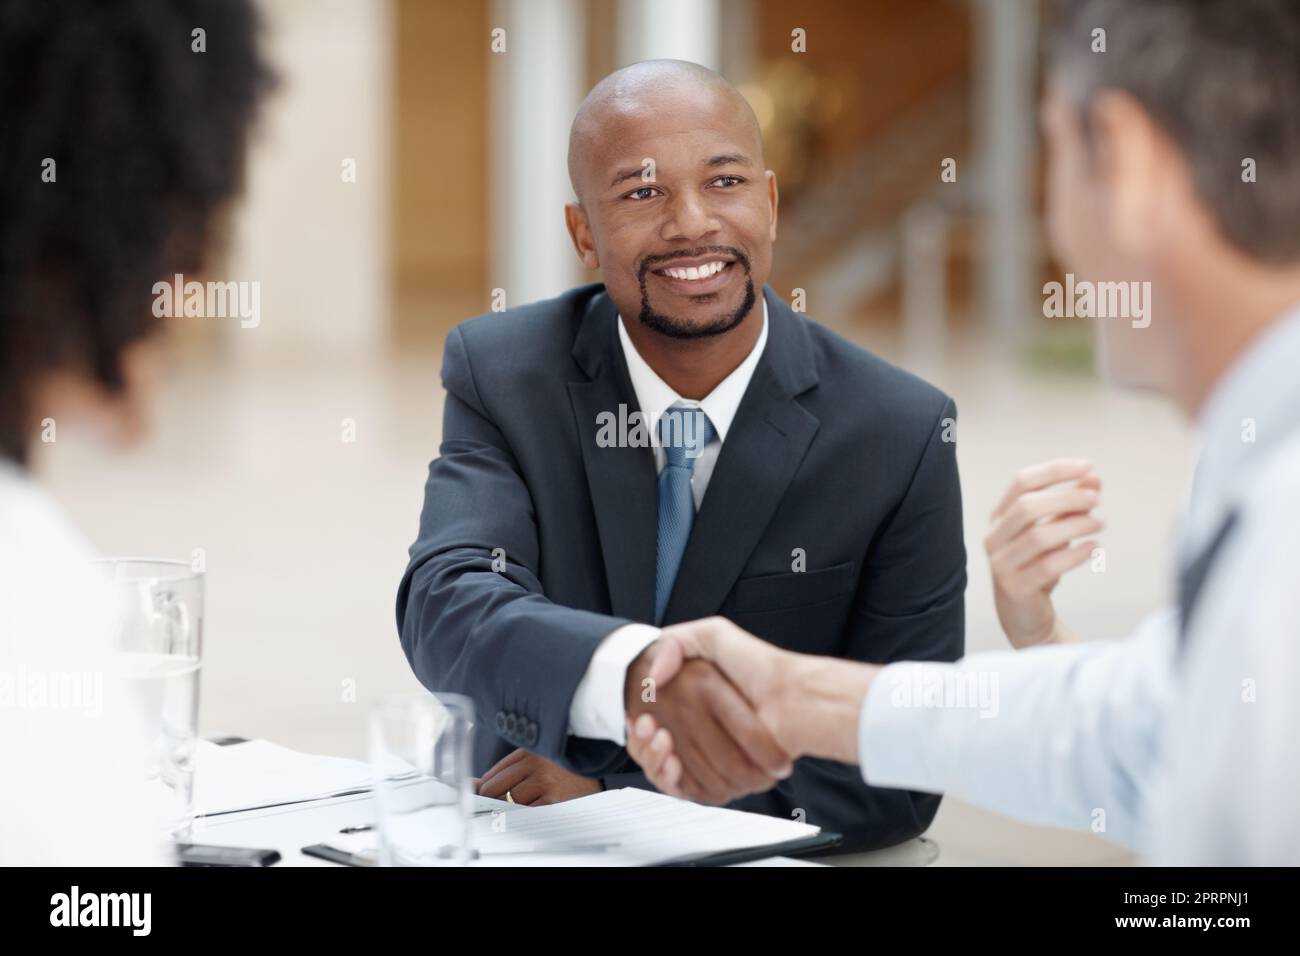 The perfect partnership. Two business executives shaking hands in agreement. Stock Photo